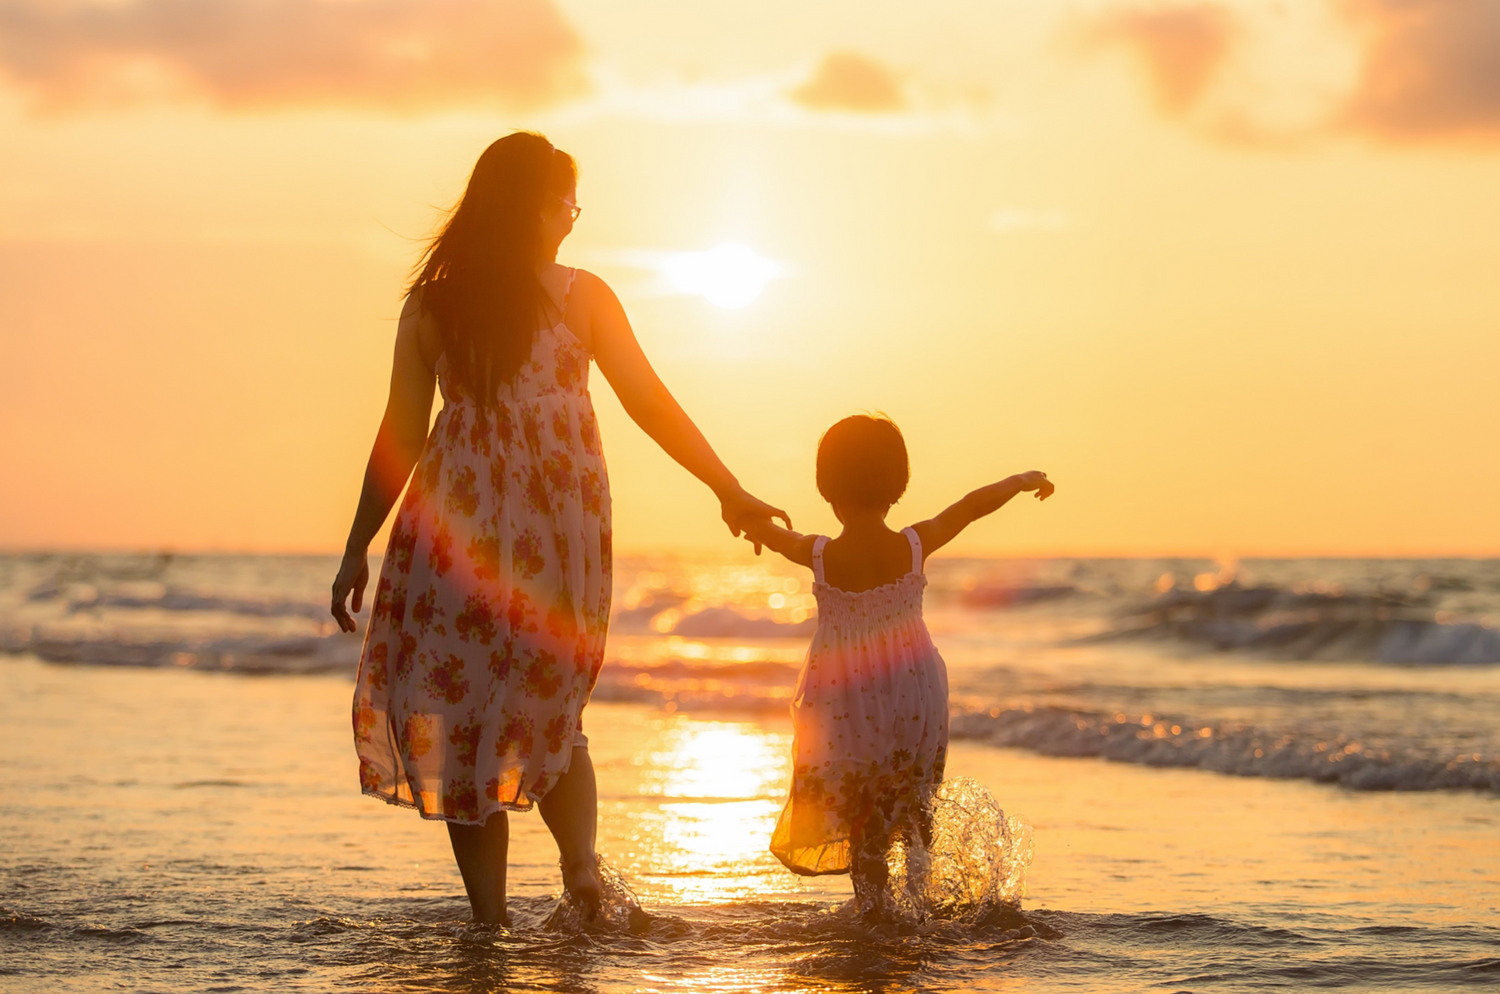 Woman and child walking on the beach at sunset. Golden sunset tones. 